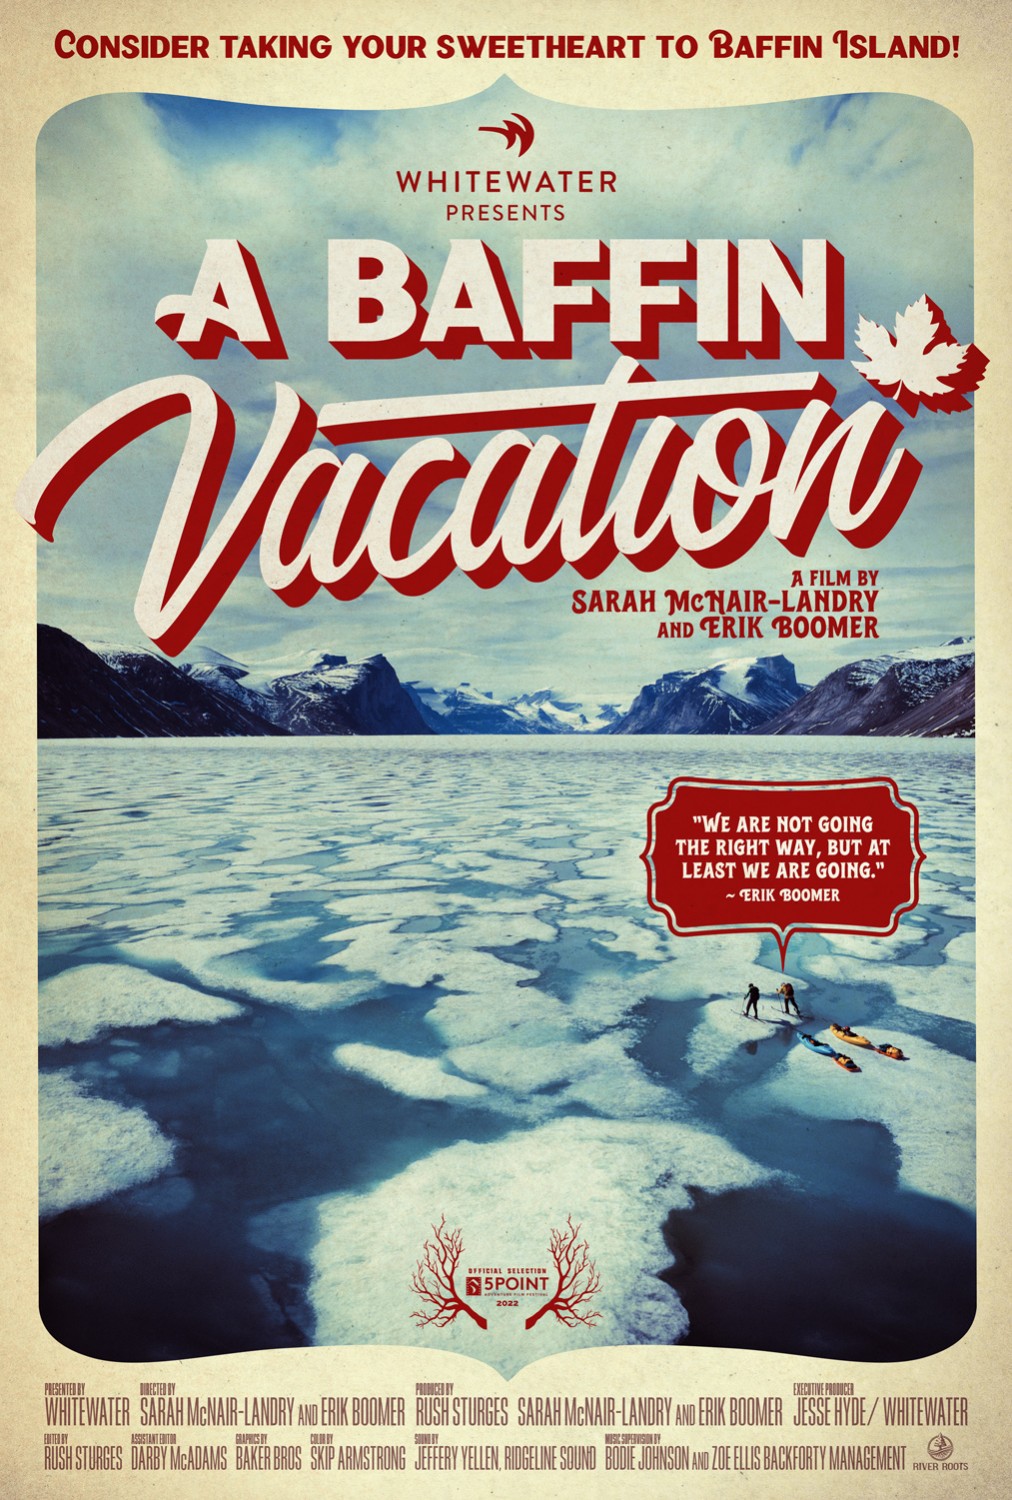 Extra Large Movie Poster Image for A Baffin Vacation